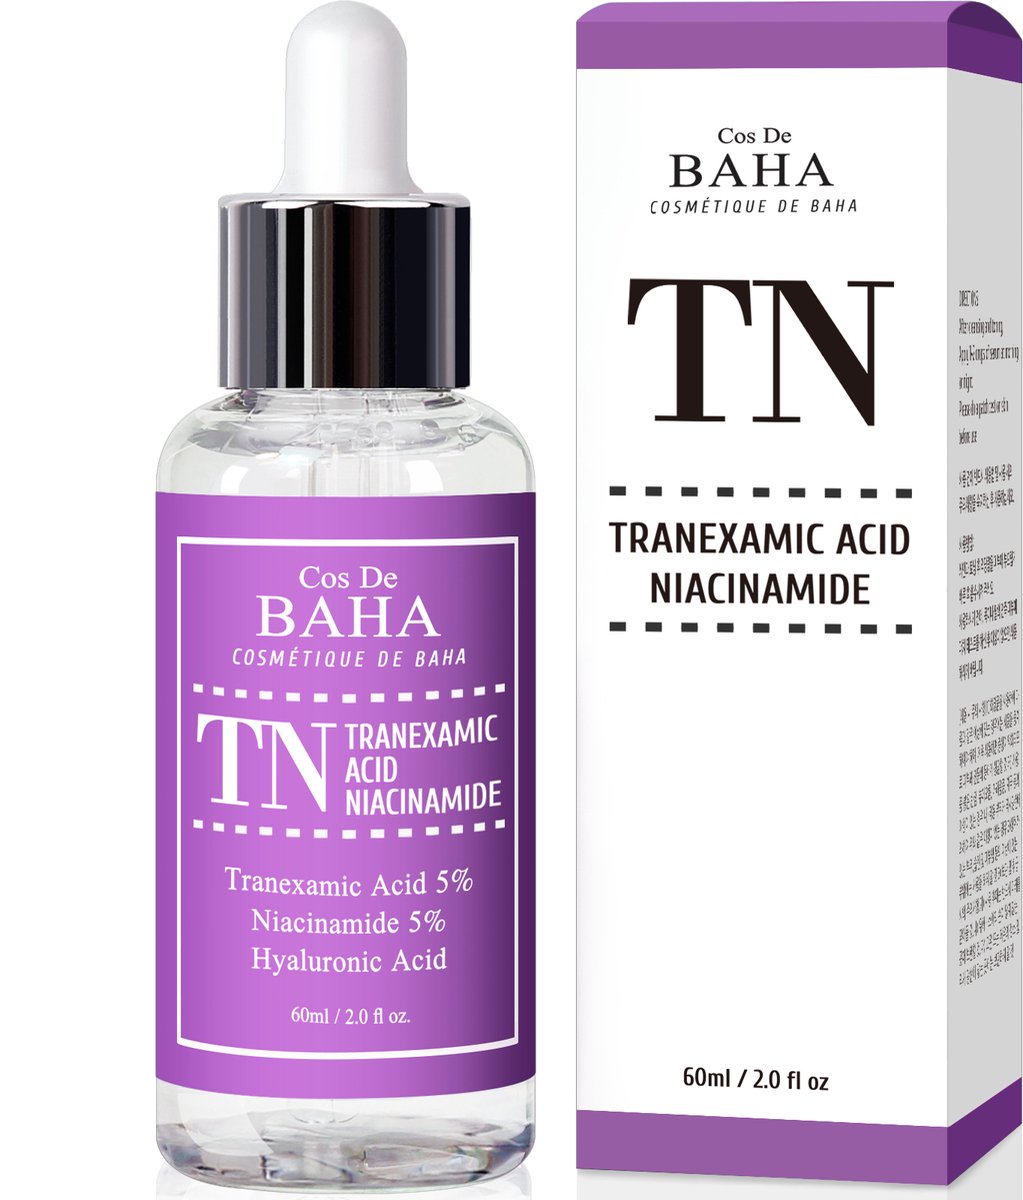 Cos de BAHA Serum Tranexamic Acid 5% Serum with Niacinamide 5% for Face/Neck - Helps to Reduce the Look of Hyper-Pigmentation, Discoloration, Dark Spots, Remover Melasma- K Beauty - 60 ml